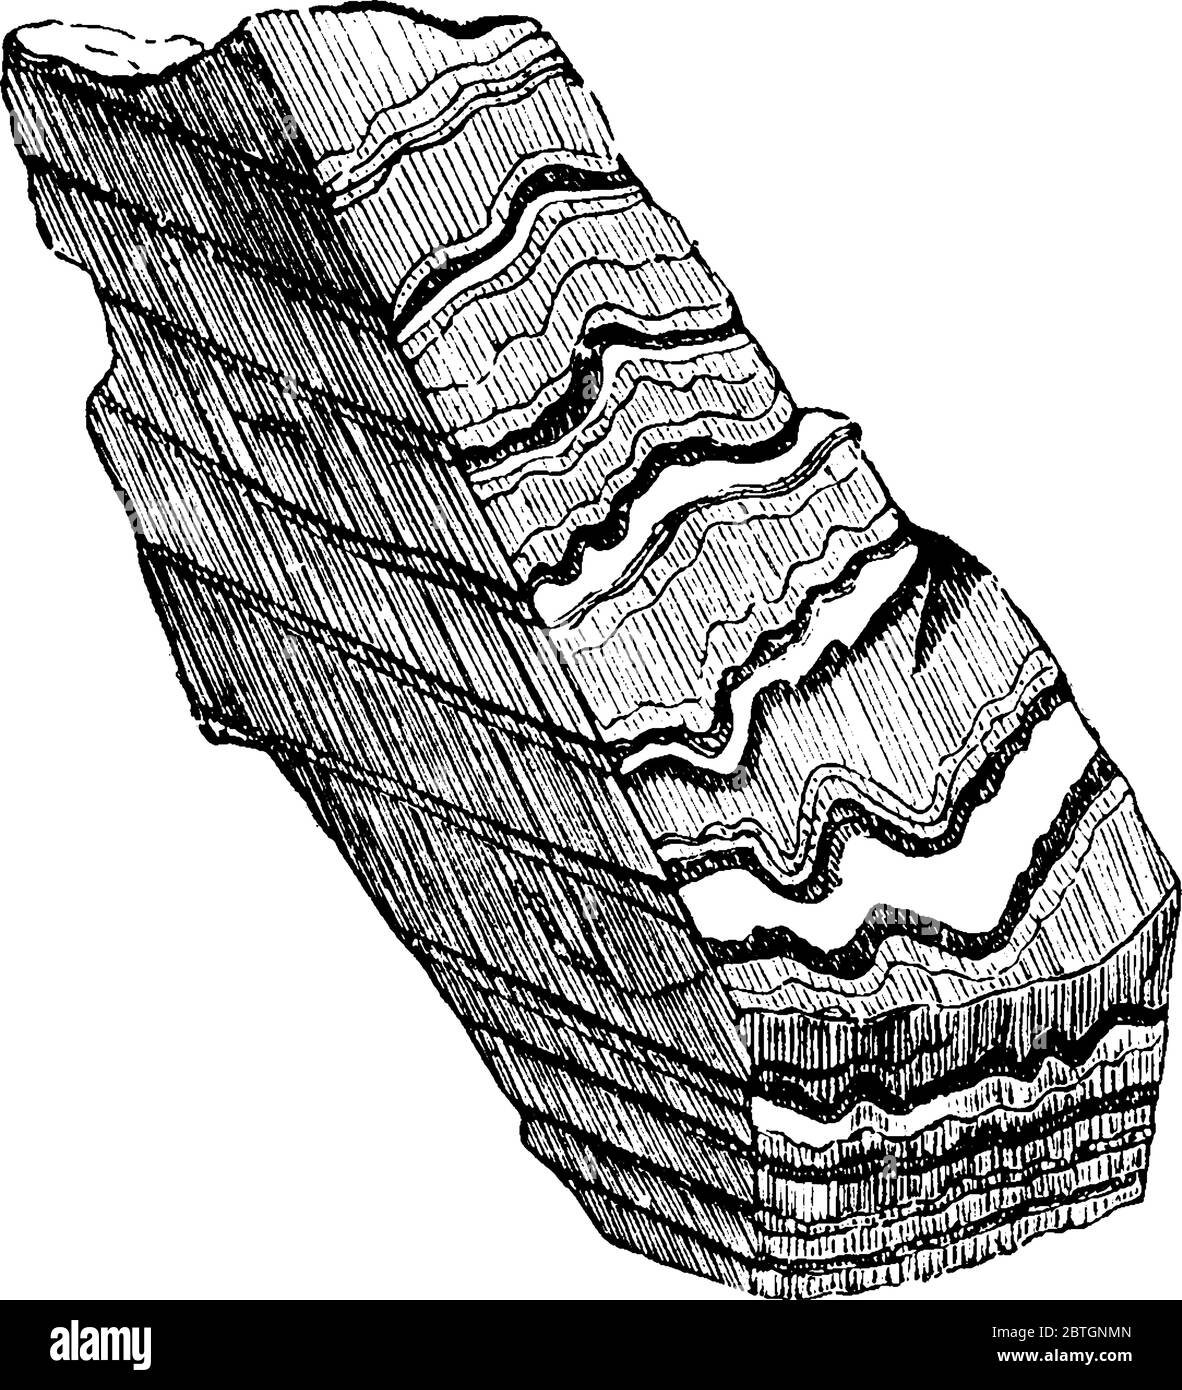 Slaty cleavage, it is a pervasive, parallel layering of fine grained platy minerals (chlorite), vintage line drawing or engraving illustration. Stock Vector